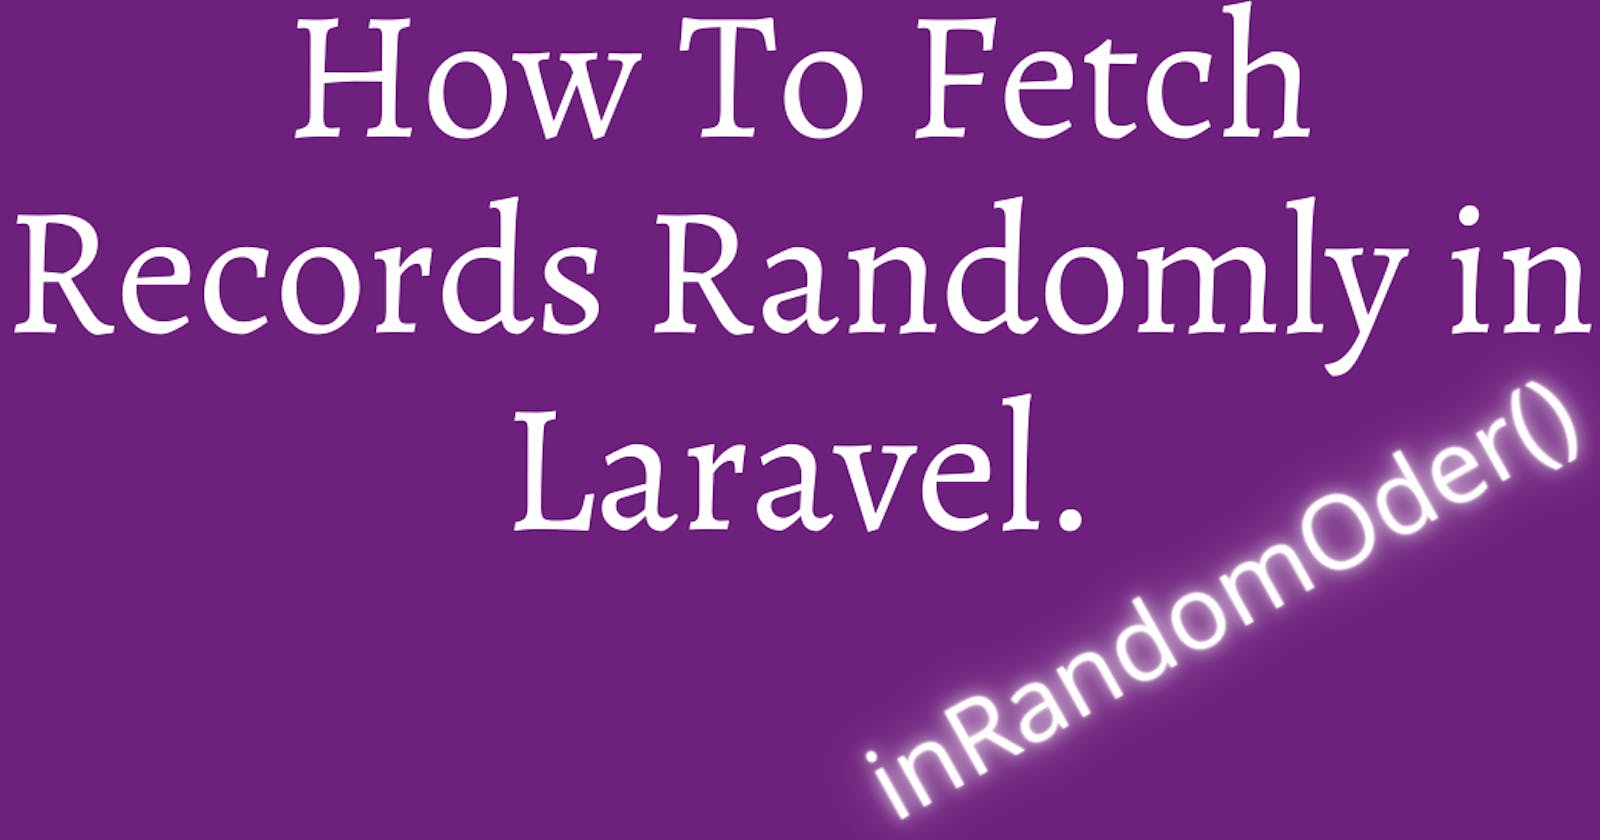 How To Fetch Resources Randomly in Laravel with a Single Line Of Code.